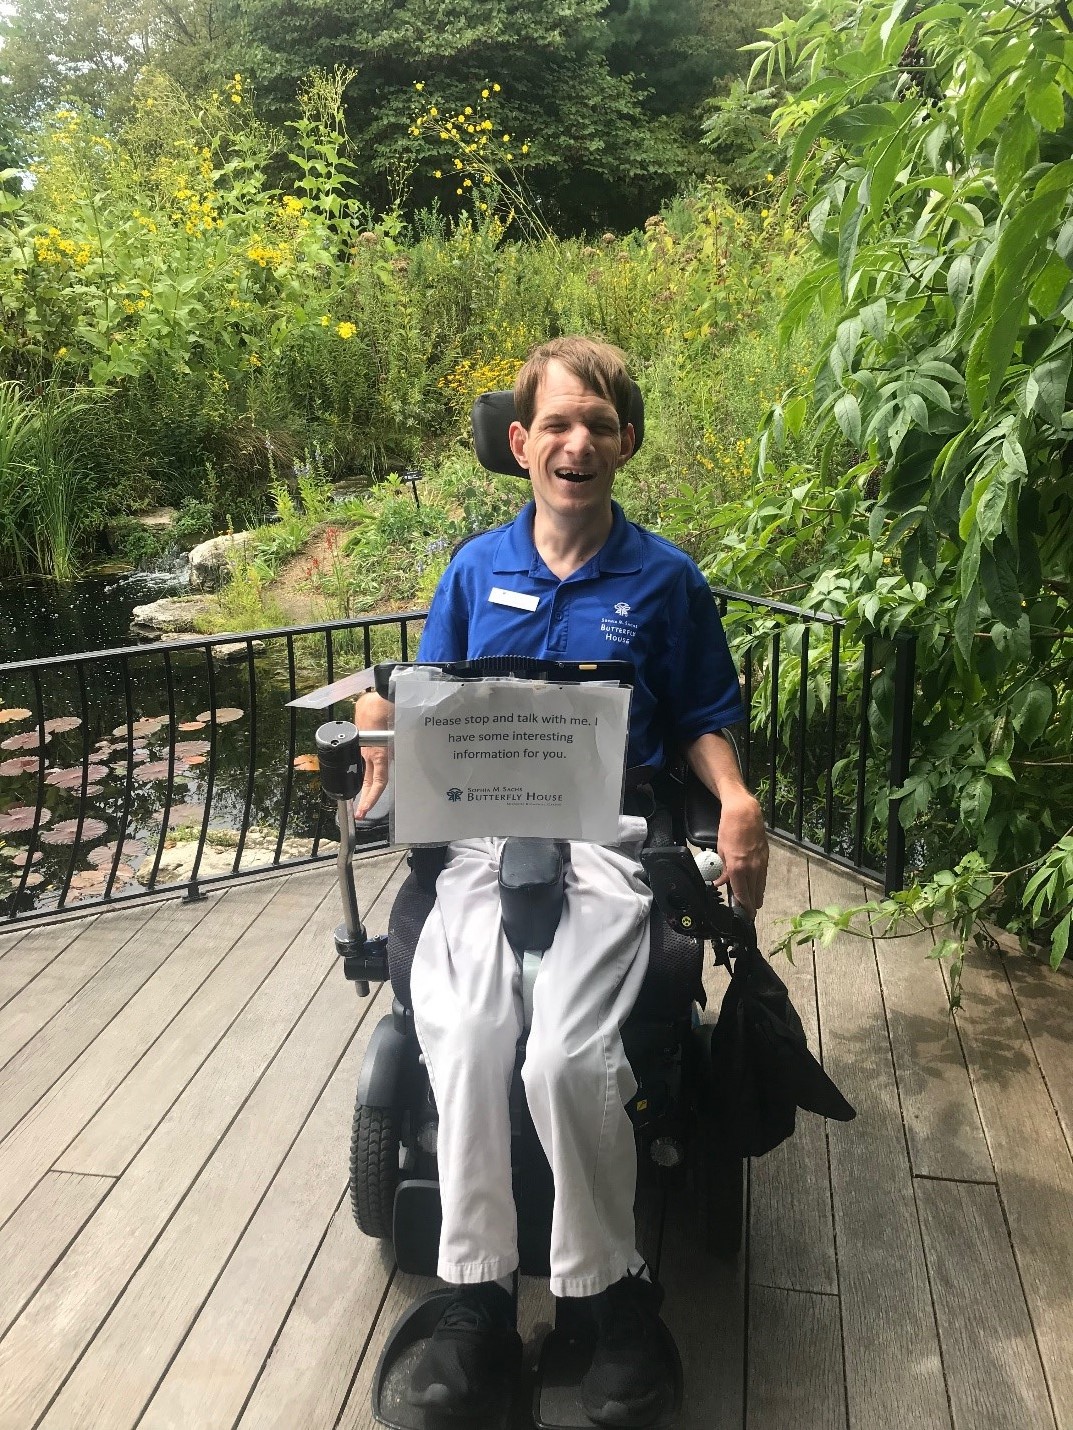 Jason with his wheelchair, AAC device and a sign inviting visitors to talk to him.